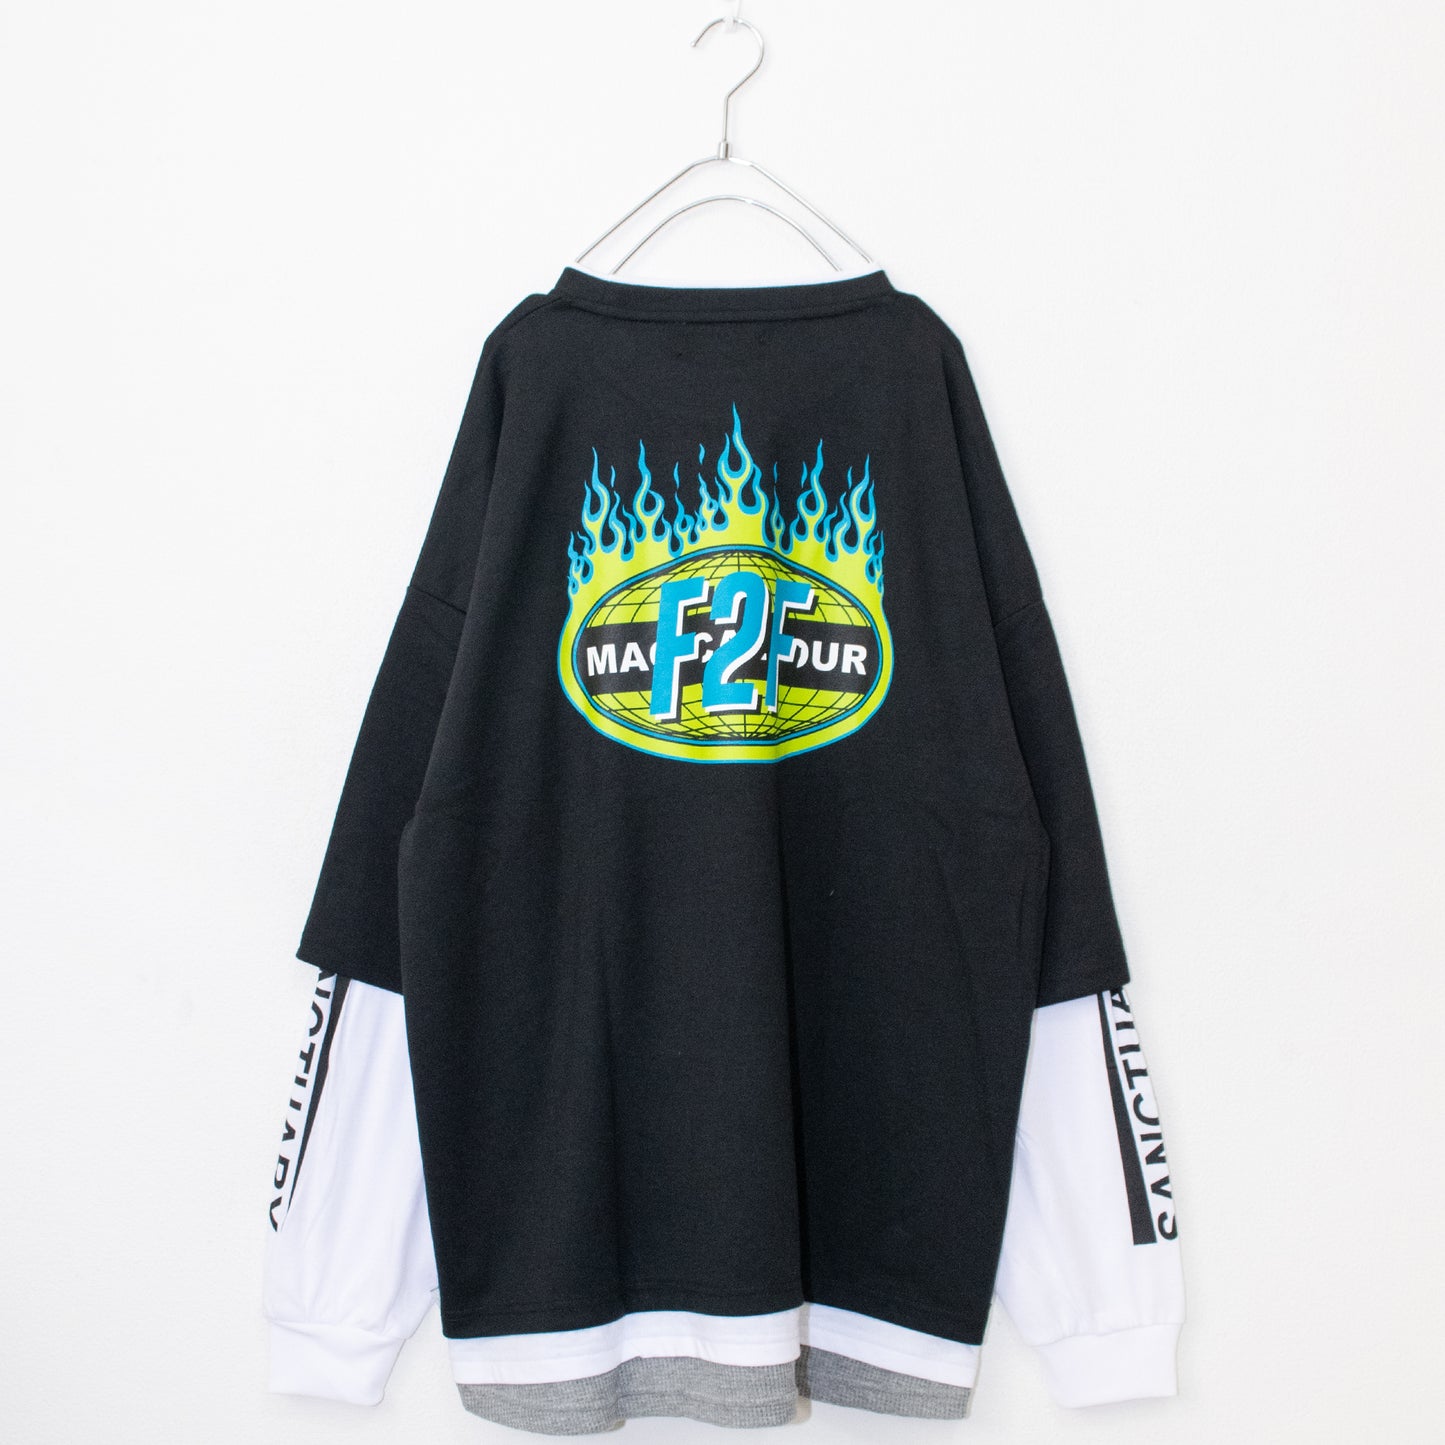 Fake Layered L/S Top - YOUAREMYPOISON